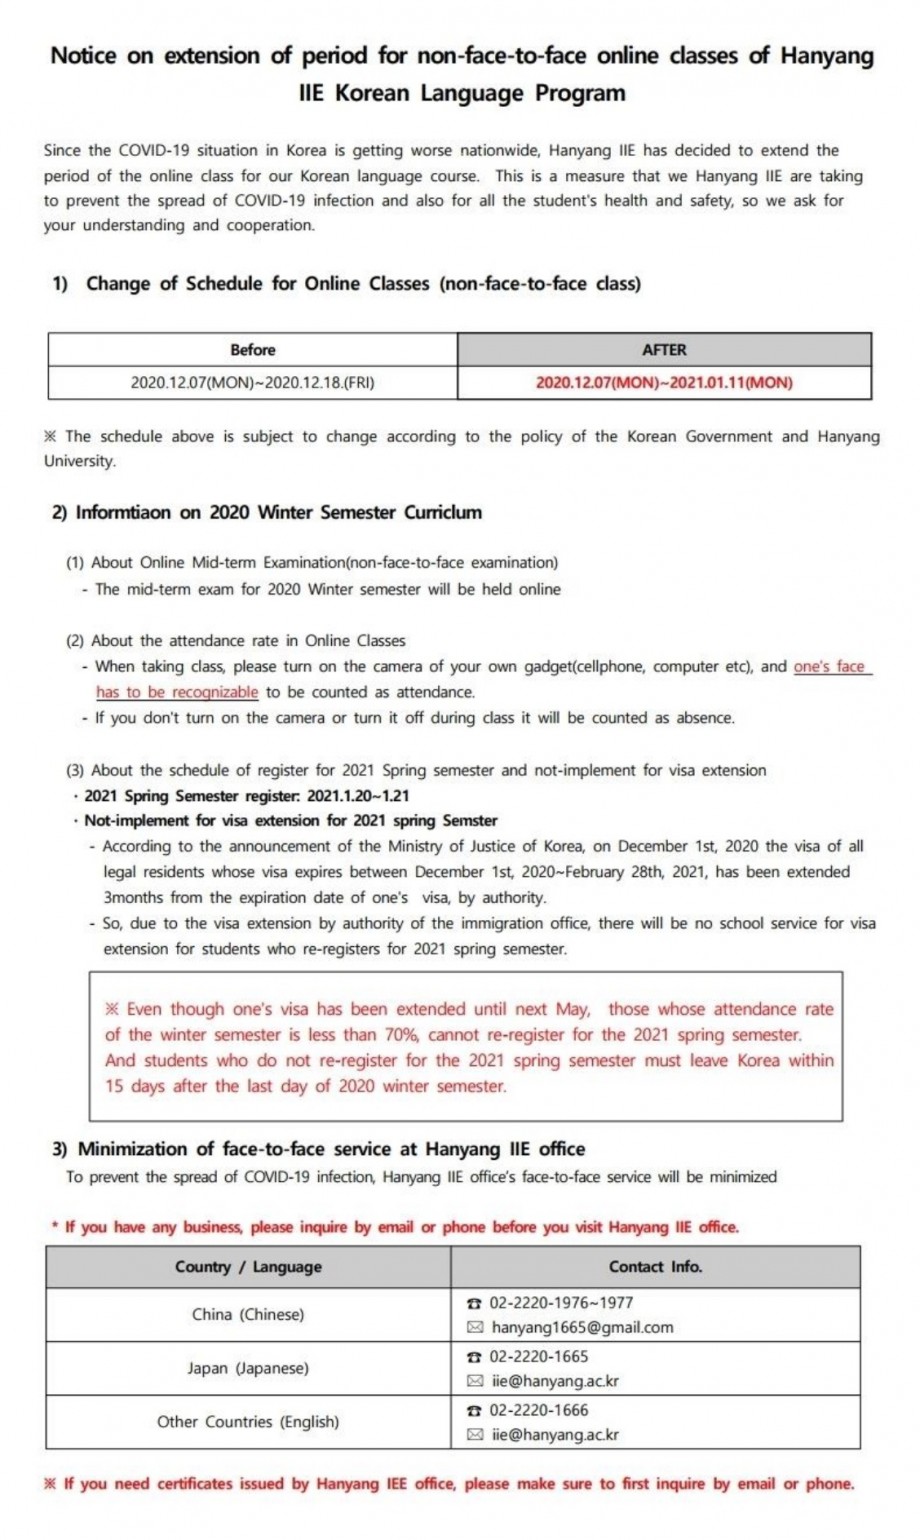 Notice on extension of period for non-face-to-face online classes of Hanyang IIE Korean Language Program